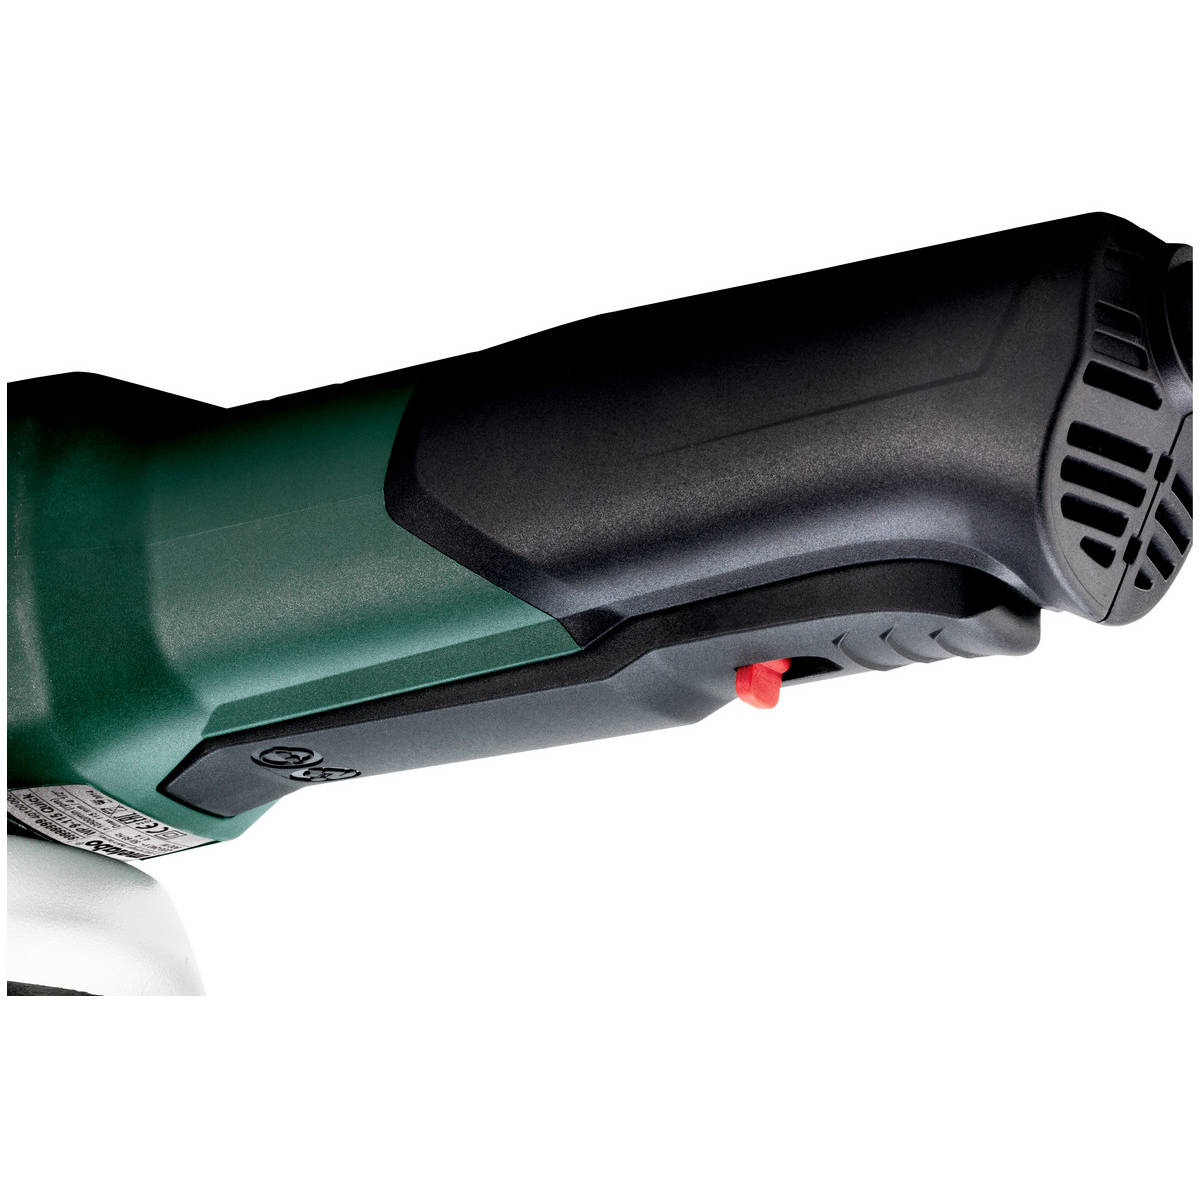 WP 11-125 Quick Metabo 5'' Angle Grinder With Paddle Switch 2